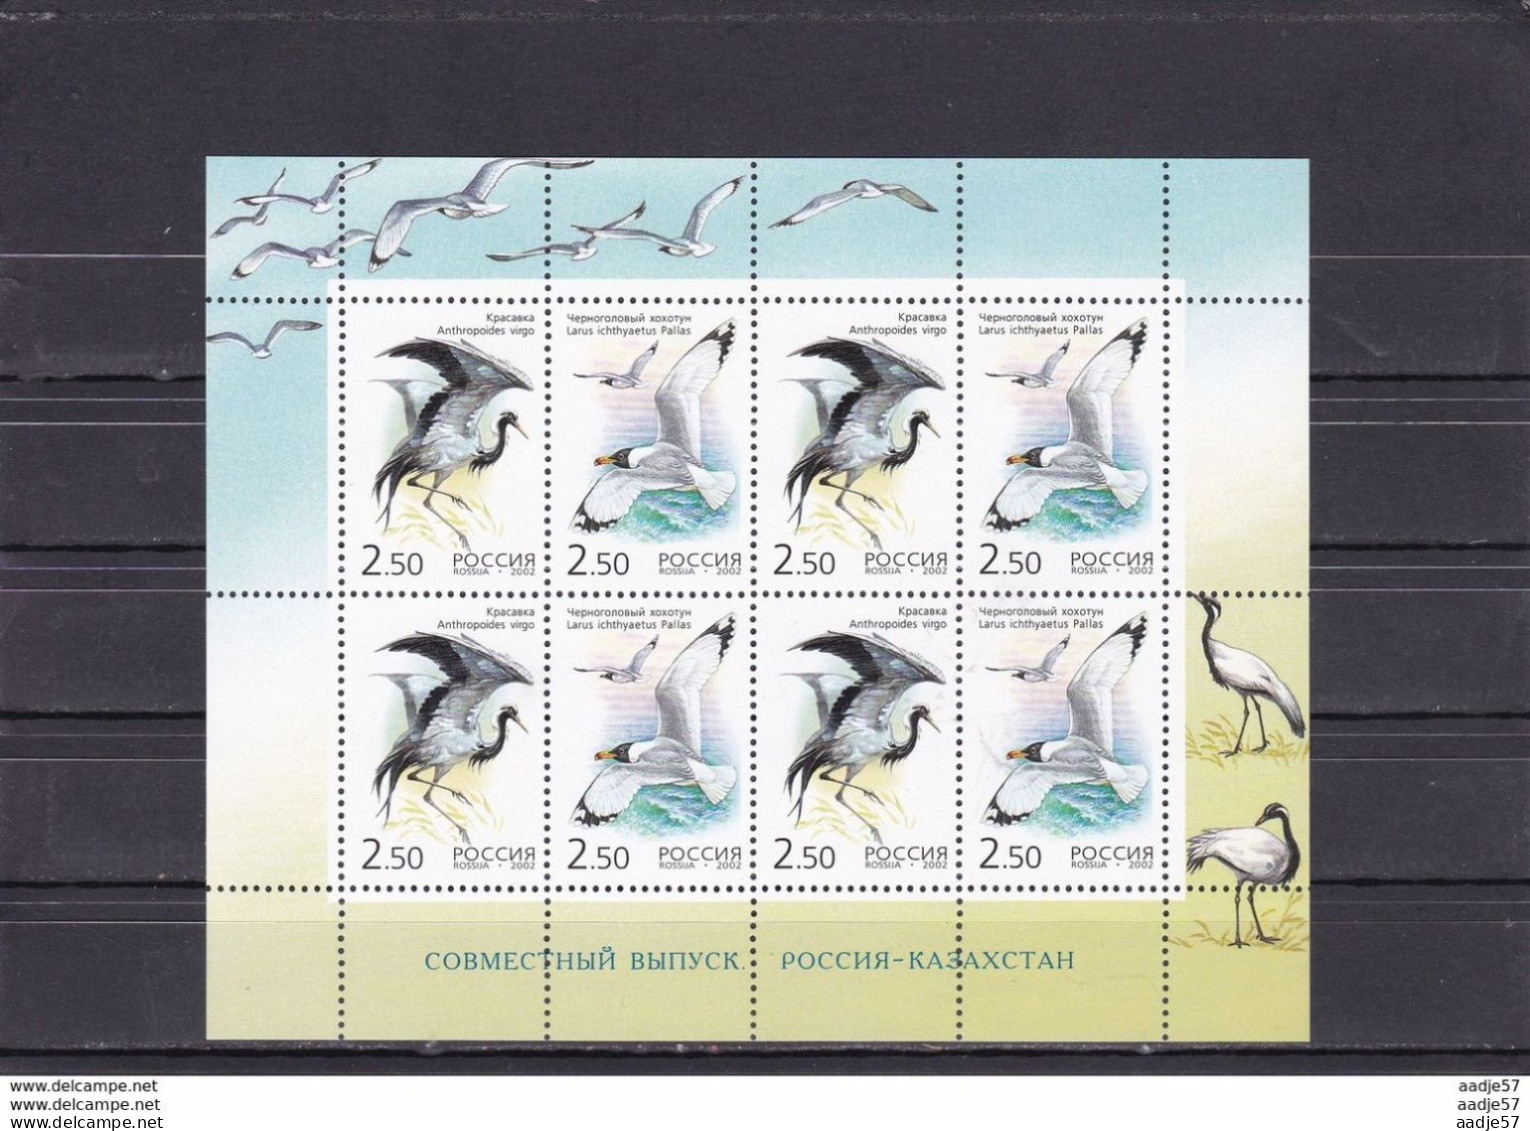 Russia 2002 With Kazakhstan Joint Issues Birds Crane Gull Larus Sheet Mi 1008-1009 Sc 6709 MNH** - Cranes And Other Gruiformes